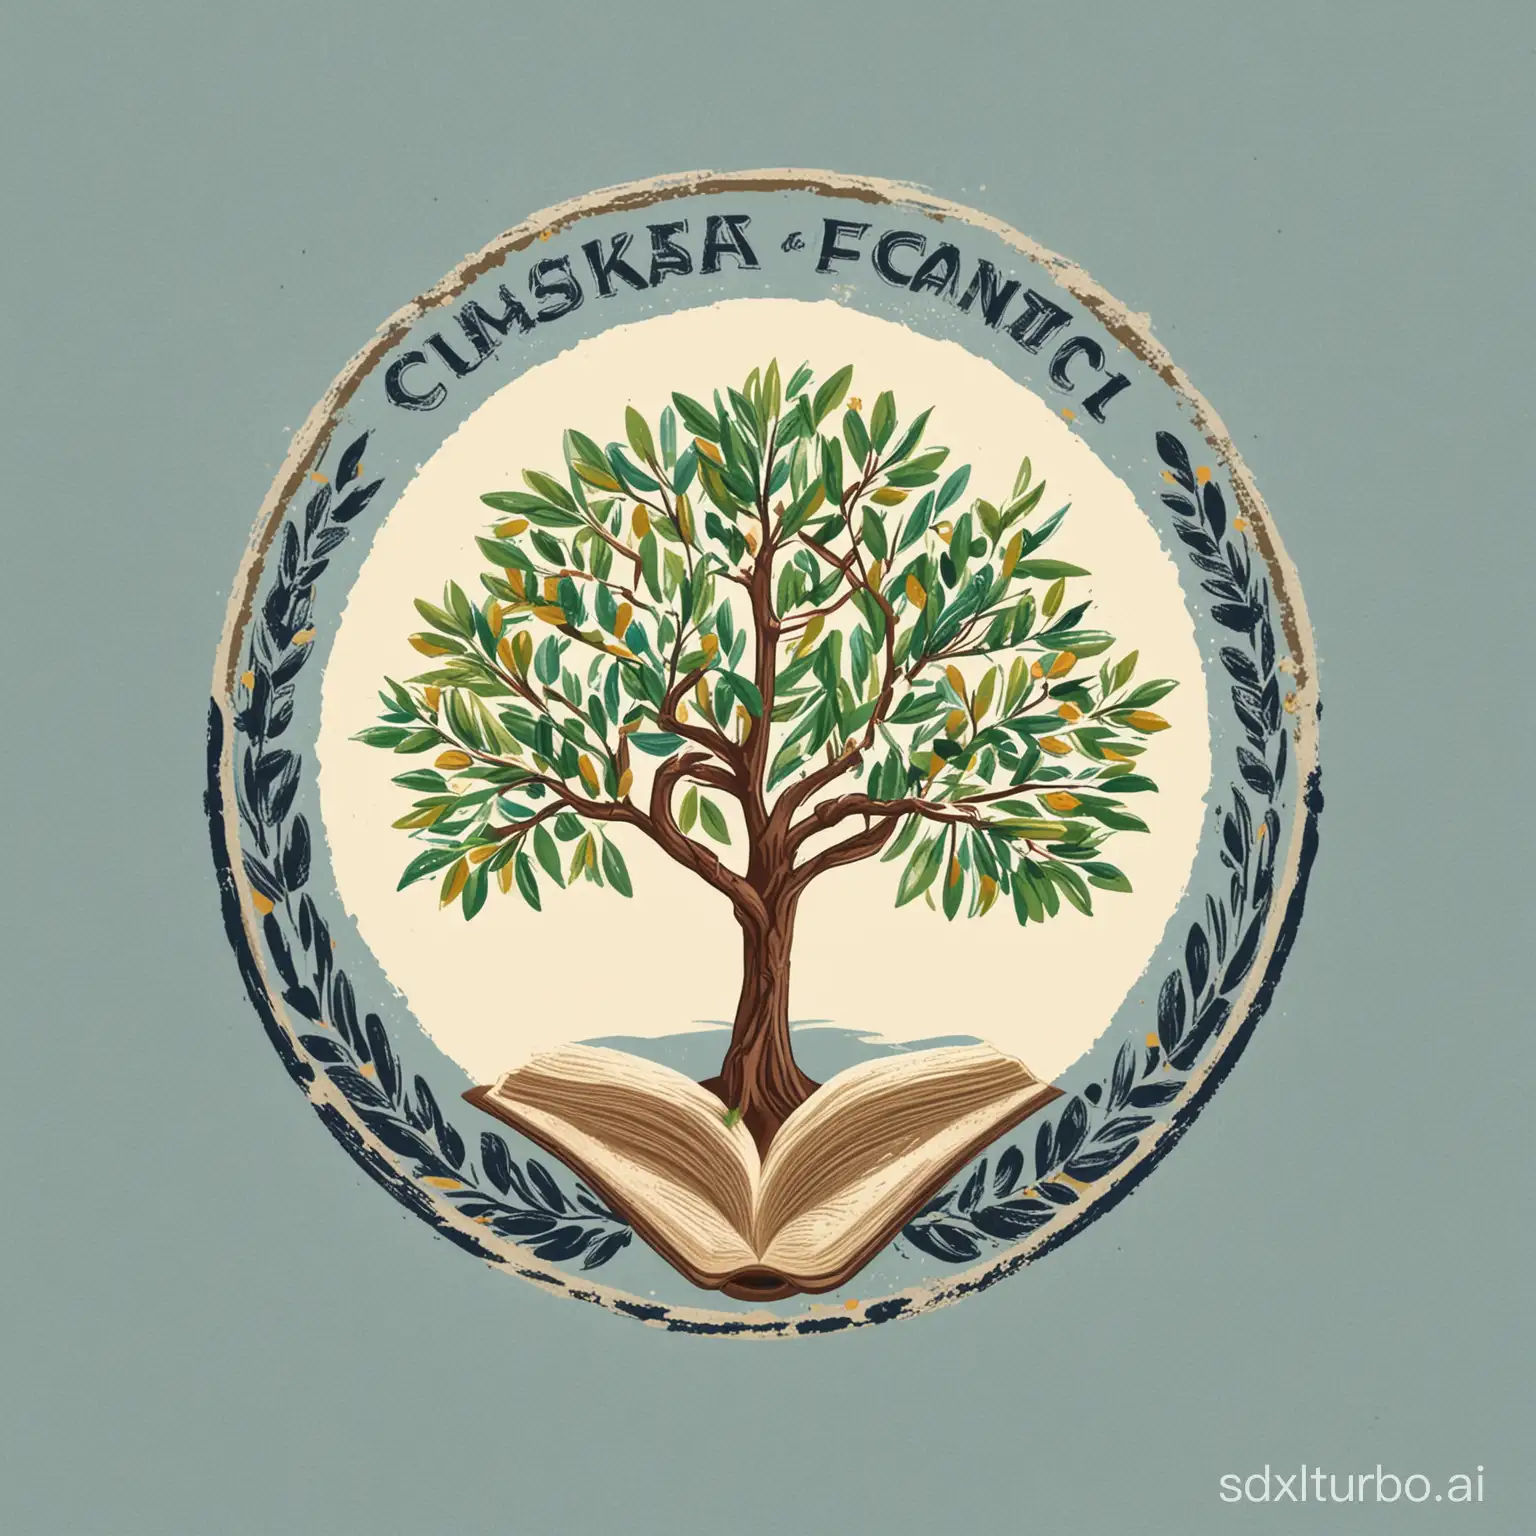 Create a logo for a primary school in Greece with an almond tree, a school and an open book